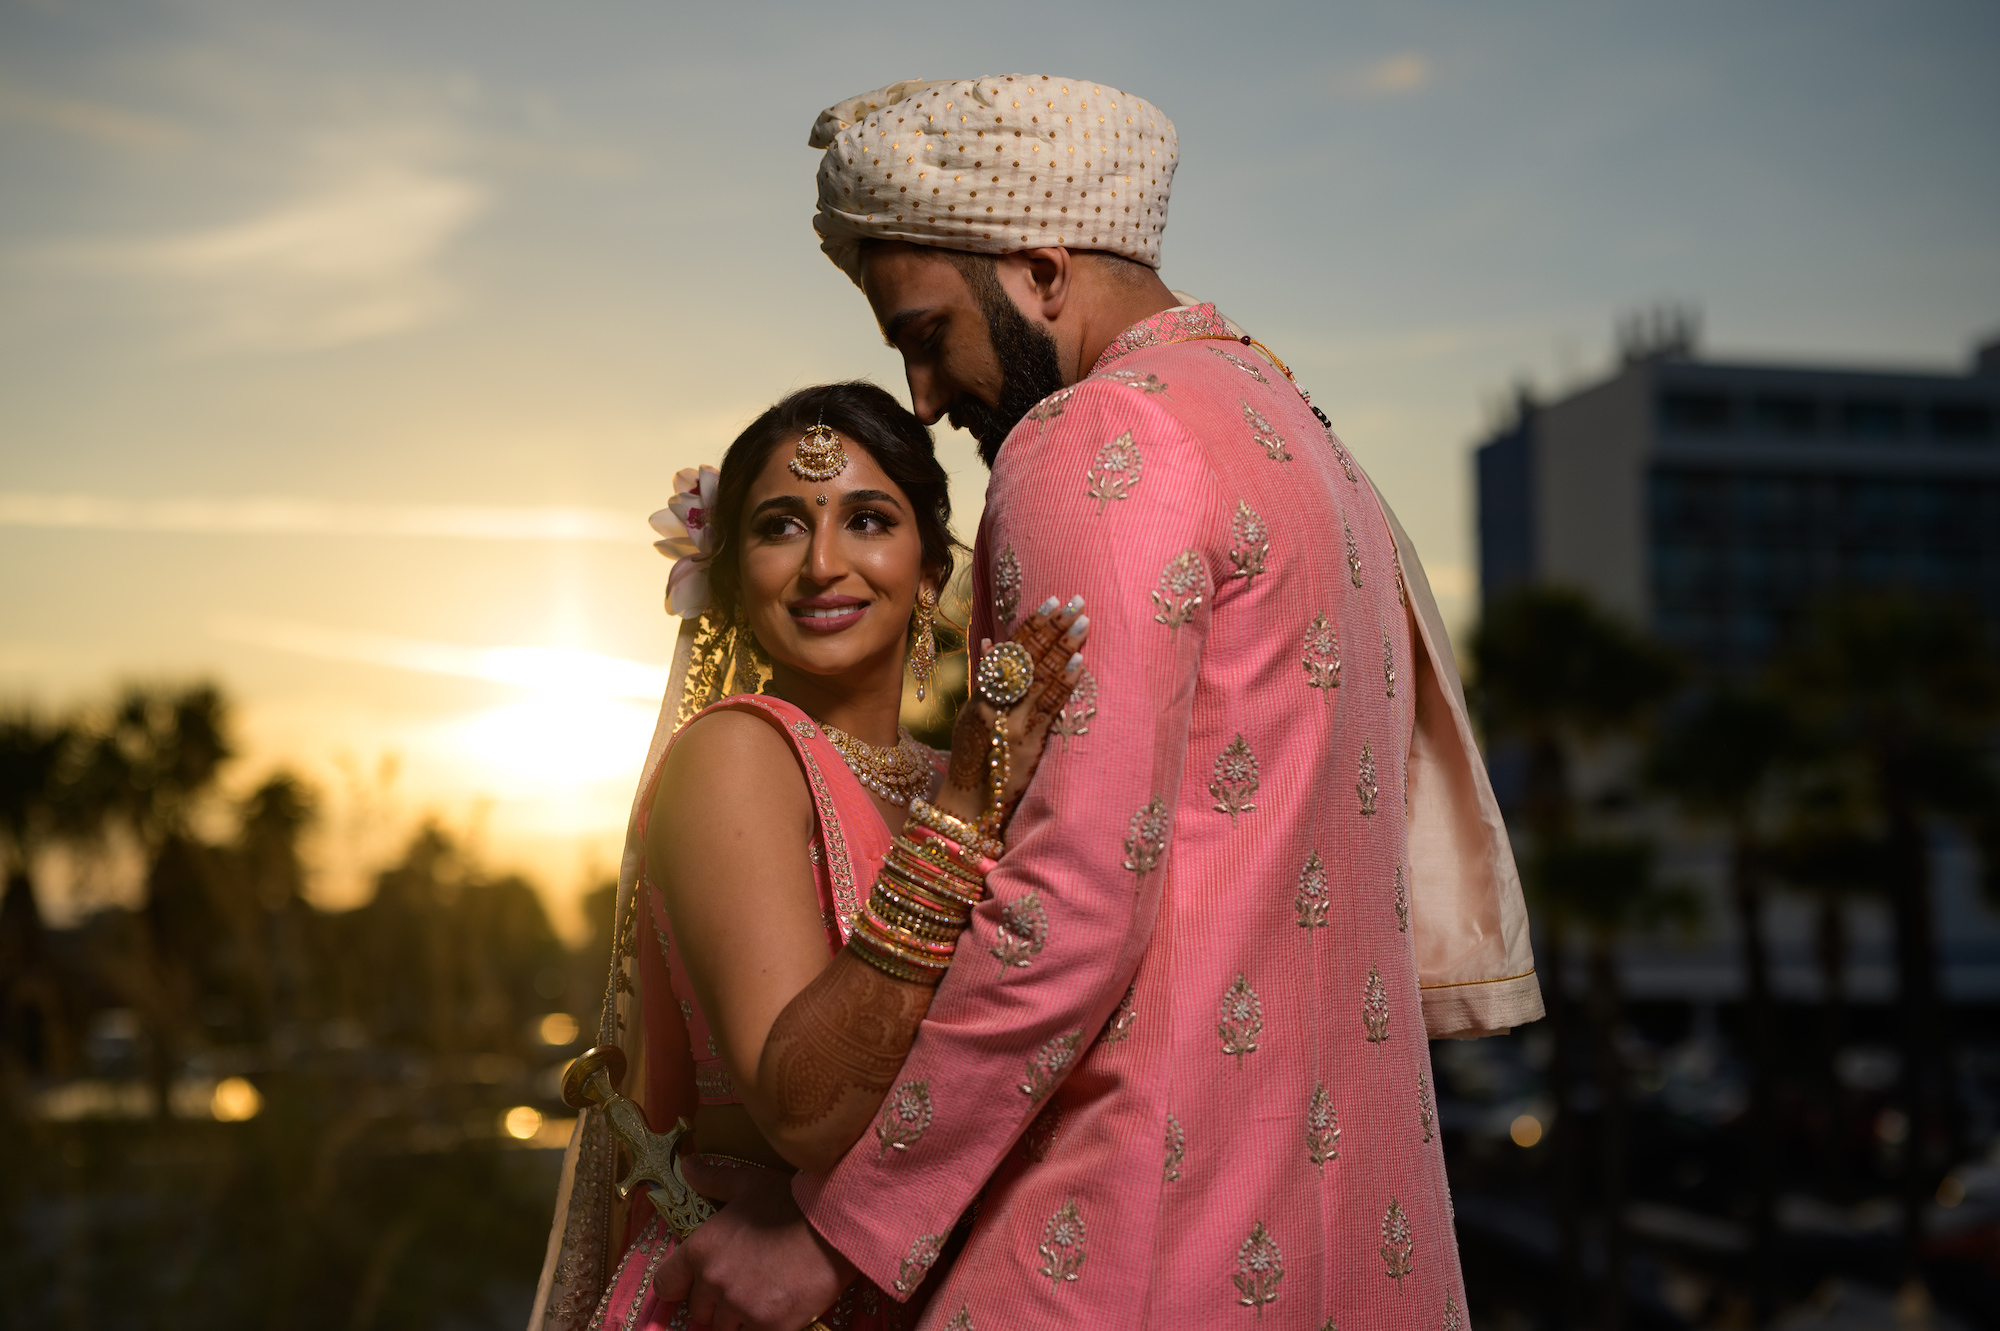 Bride and Groom Sunset Wedding Portrait At Hilton Clearwater Beach, Wearing Traditional Indian Wedding Attire in Bright Pink and Gold | Tampa Bay Hair and Makeup Artist Michele Renee The Studio